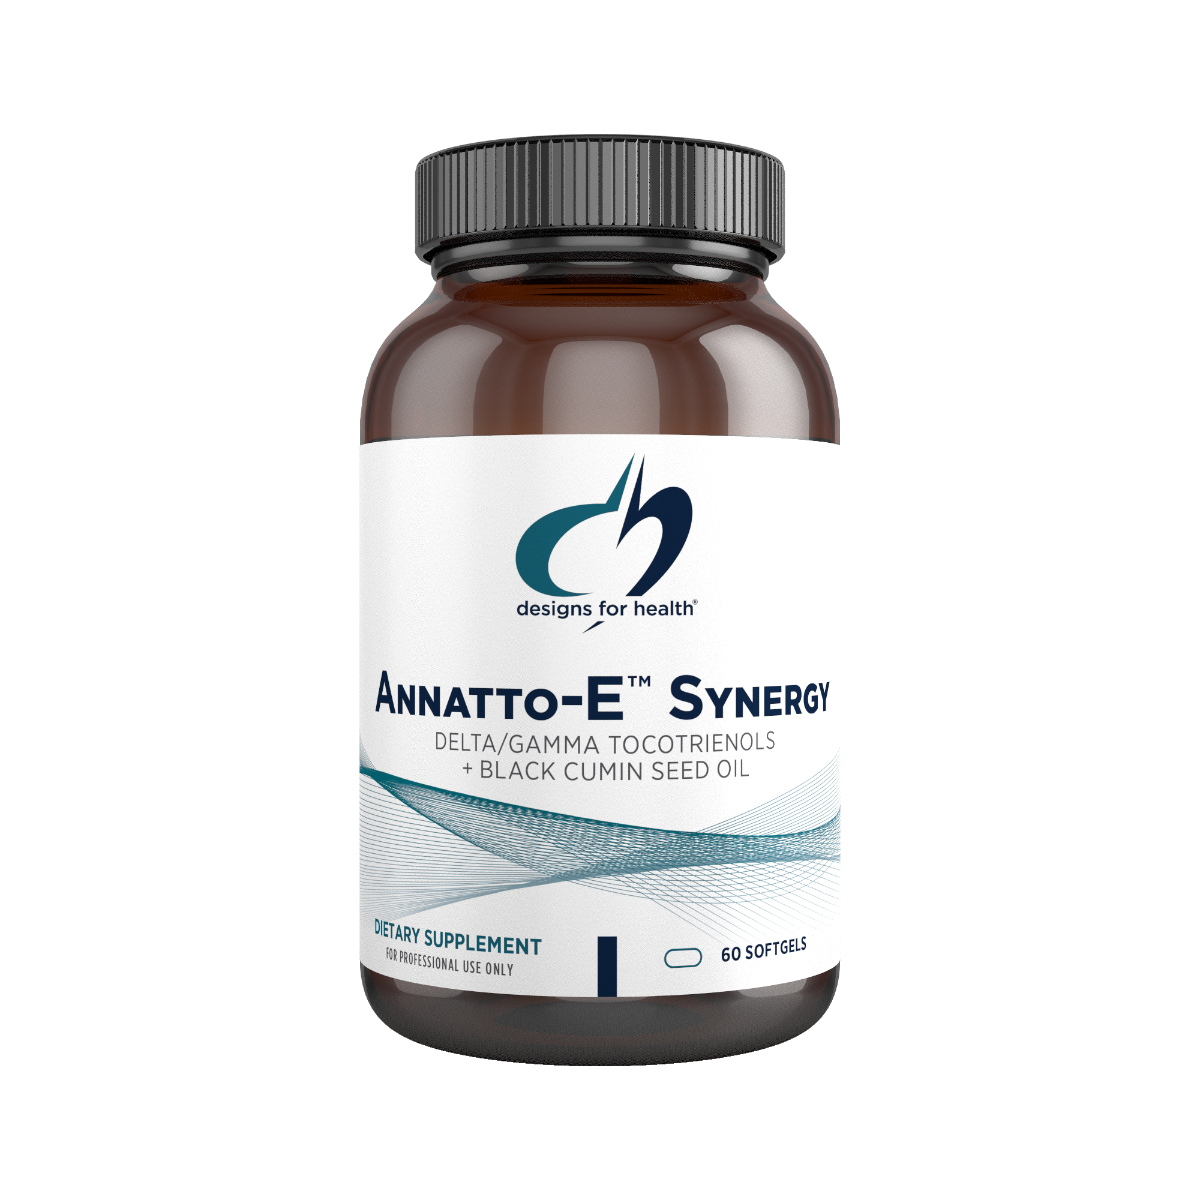 Annatto-E Synergy with Black Cumin Seed Oil - 60 Softgels | Designs For Health